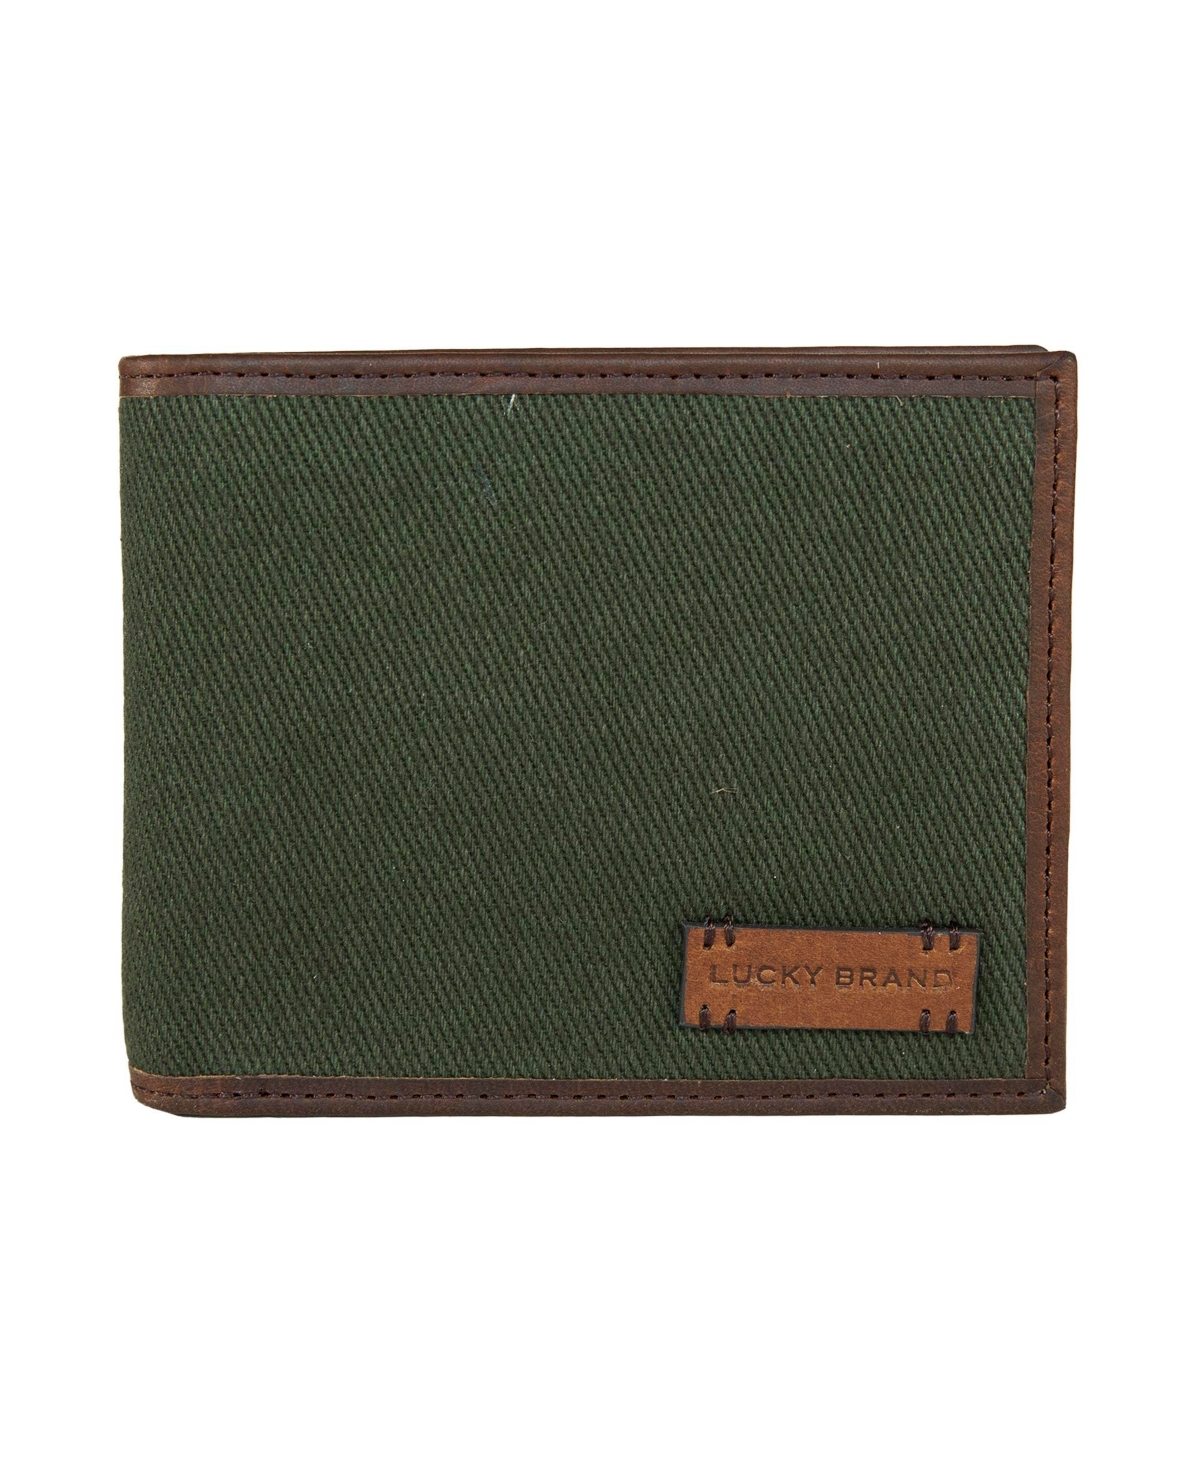 Men's Canvas with Leather Trim Bifold Wallet - Olive